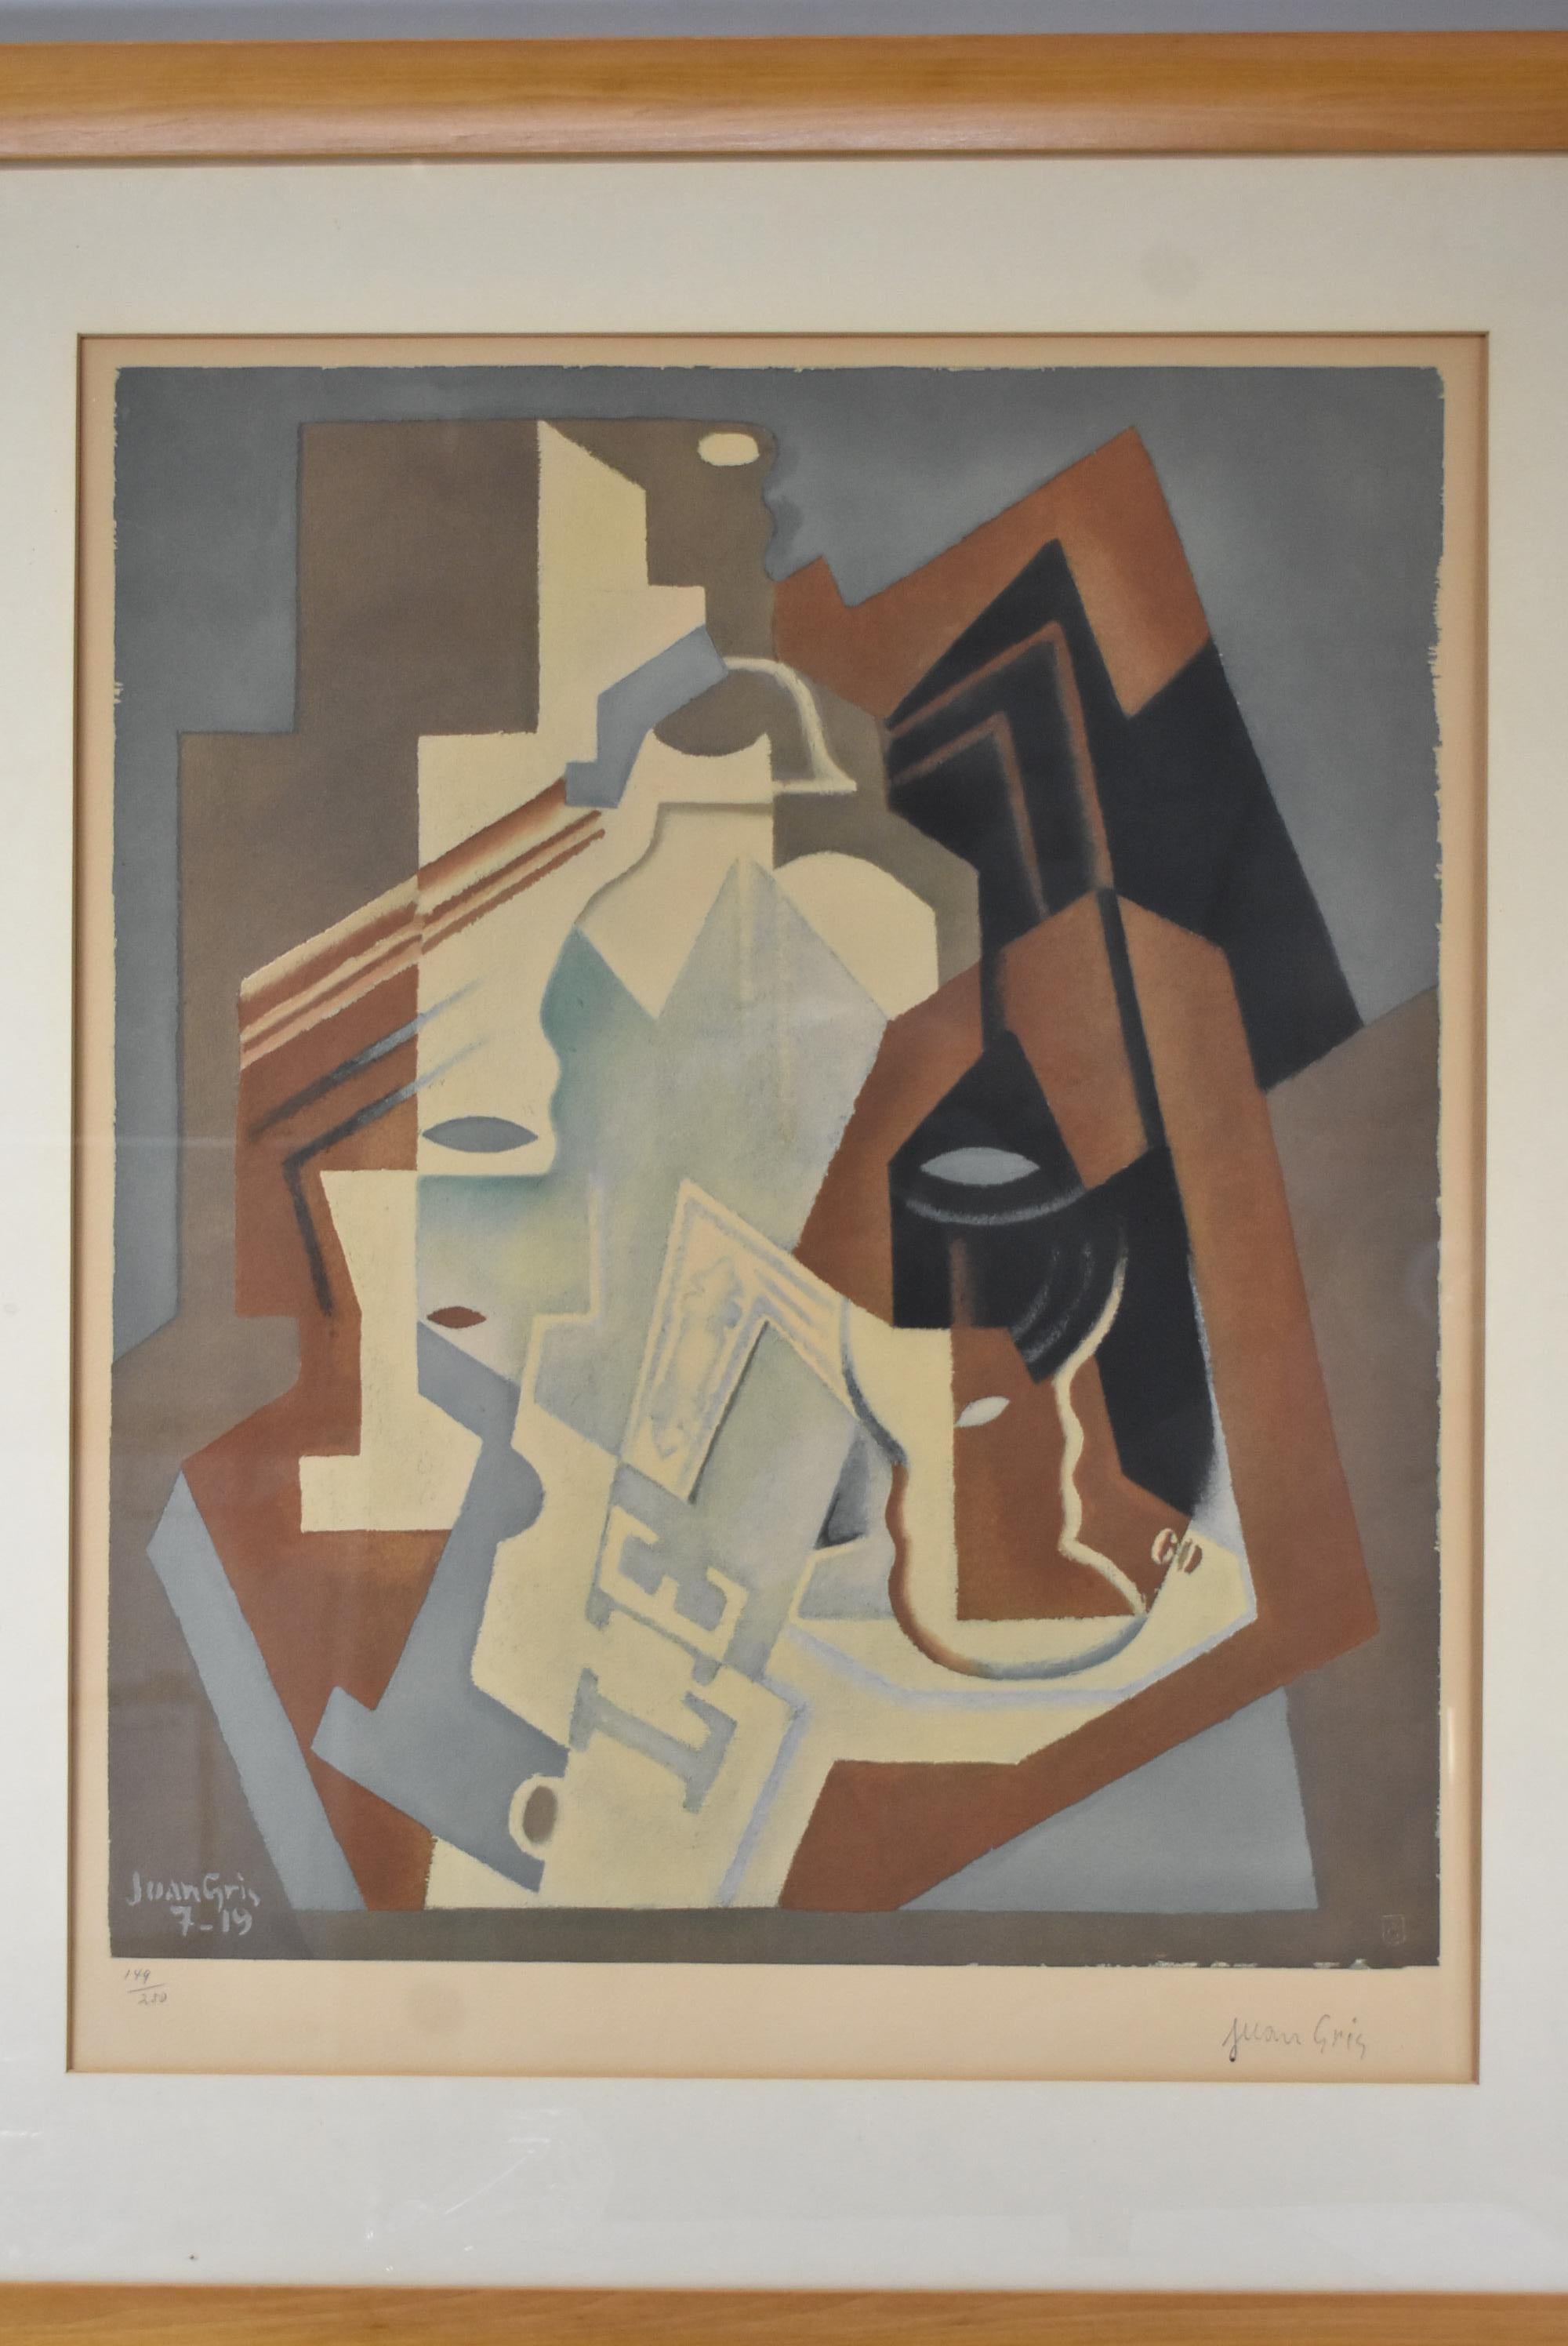 Created in 19199 collotype by Juan Gris 149/250 